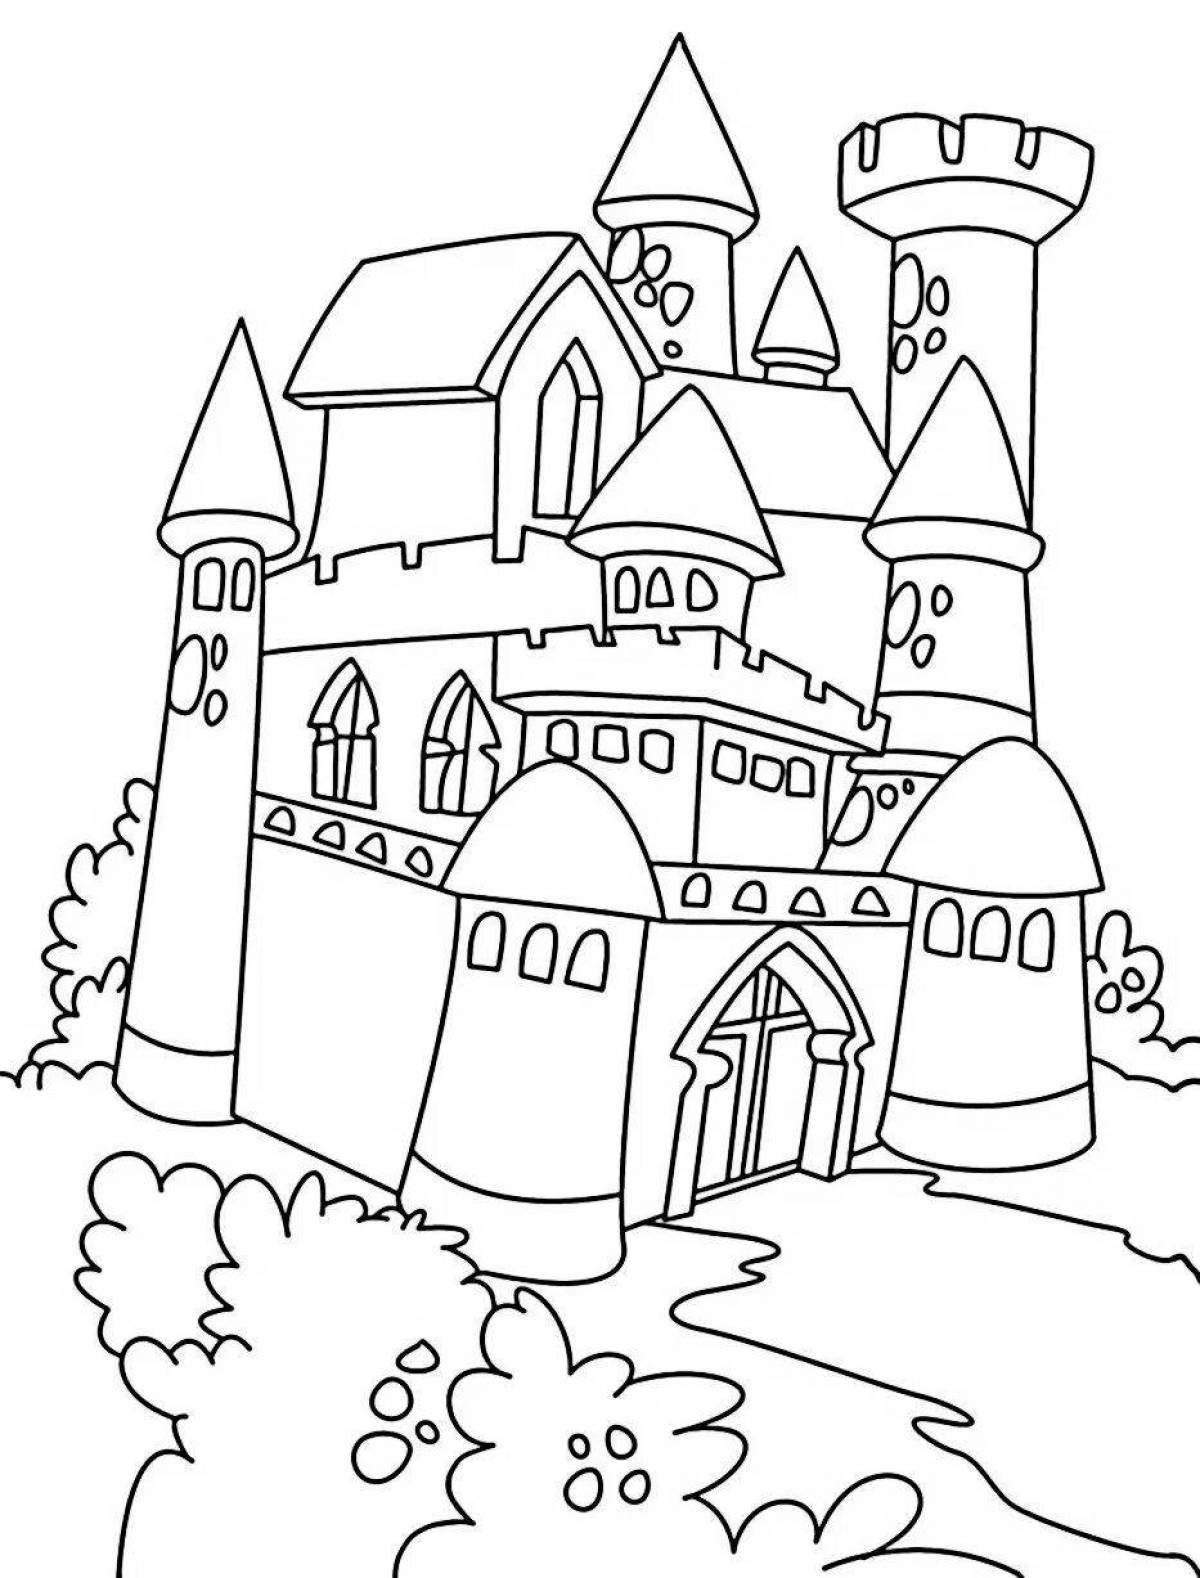 Impressive drawing of a castle